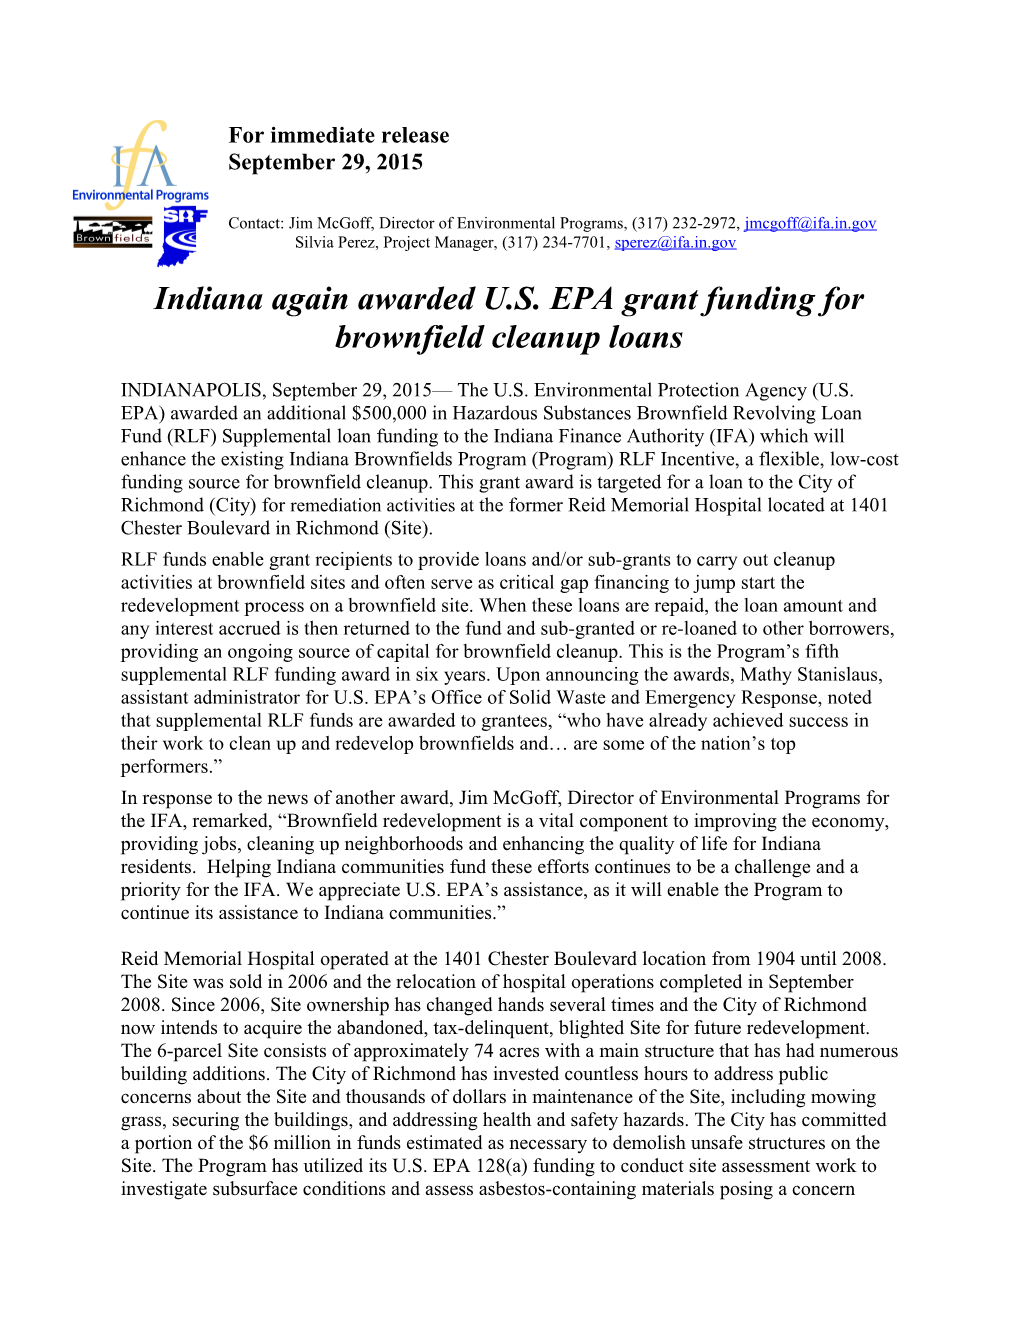 Indiana Again Awarded U.S. EPA Grant Funding for Brownfield Cleanup Loans